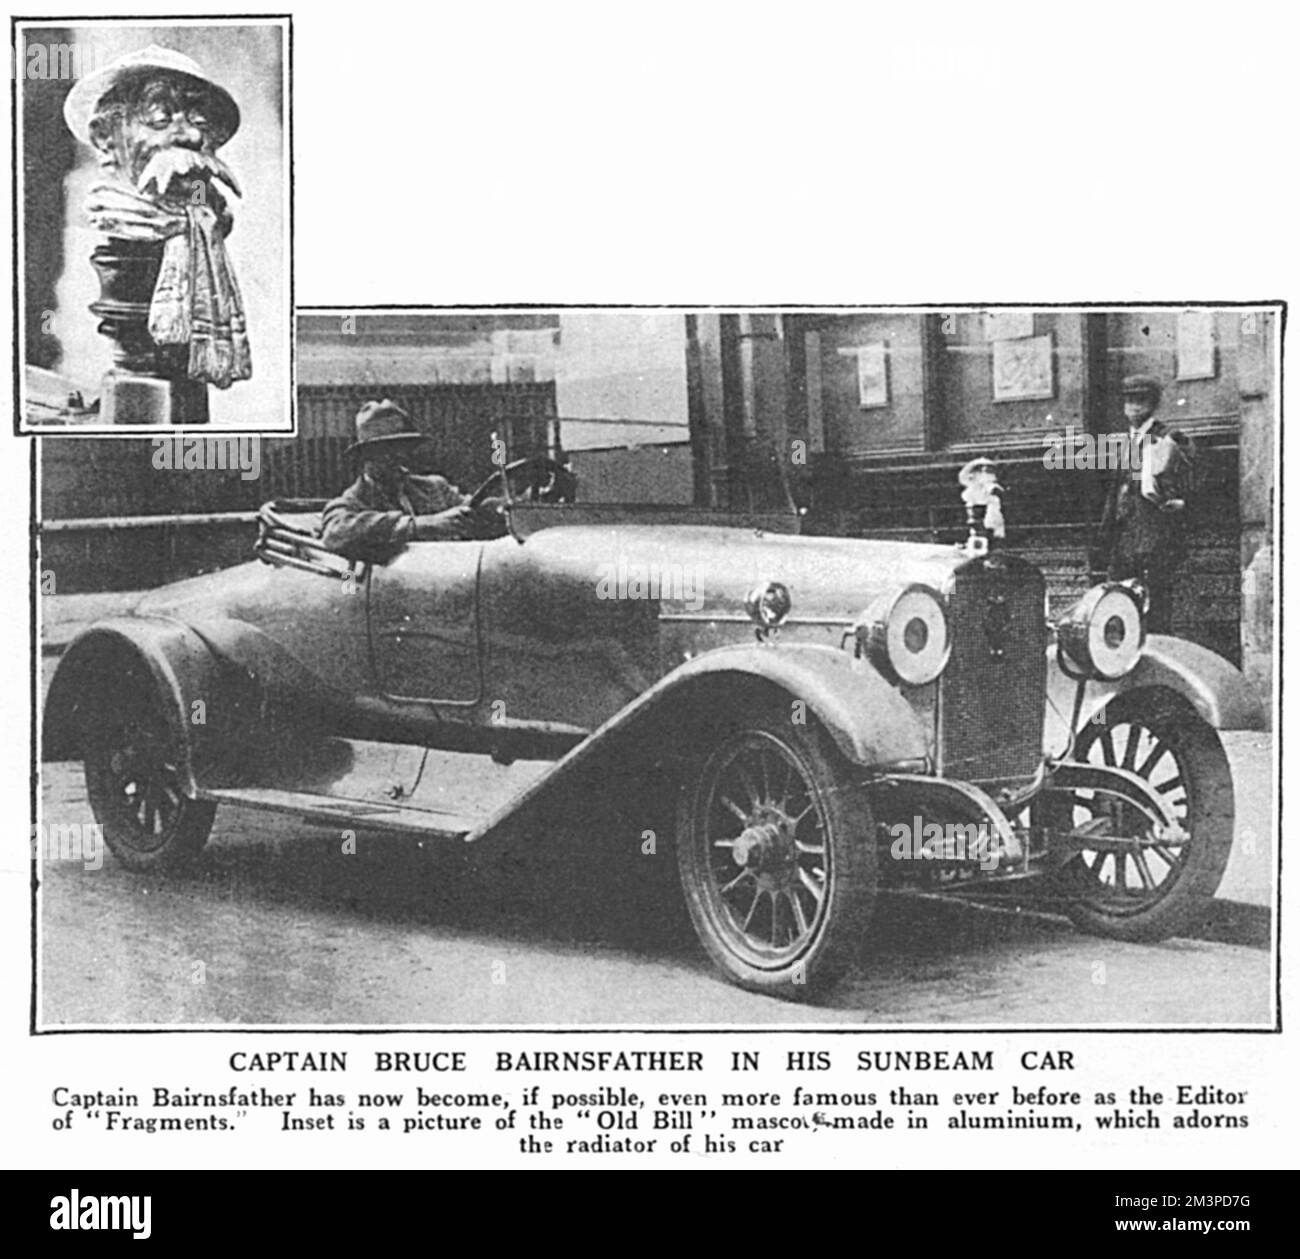 Captain Bruce Bairnsfather, famous for his cartoons of trench humour in The Bystander during the First World War seen at the wheel of his Sunbeam car with an aluminium car mascot in the shape of the character, 'Old Bill,' his most famous creation.  He would be charged for speeding in London the following year in the car.     Date: 1919 Stock Photo